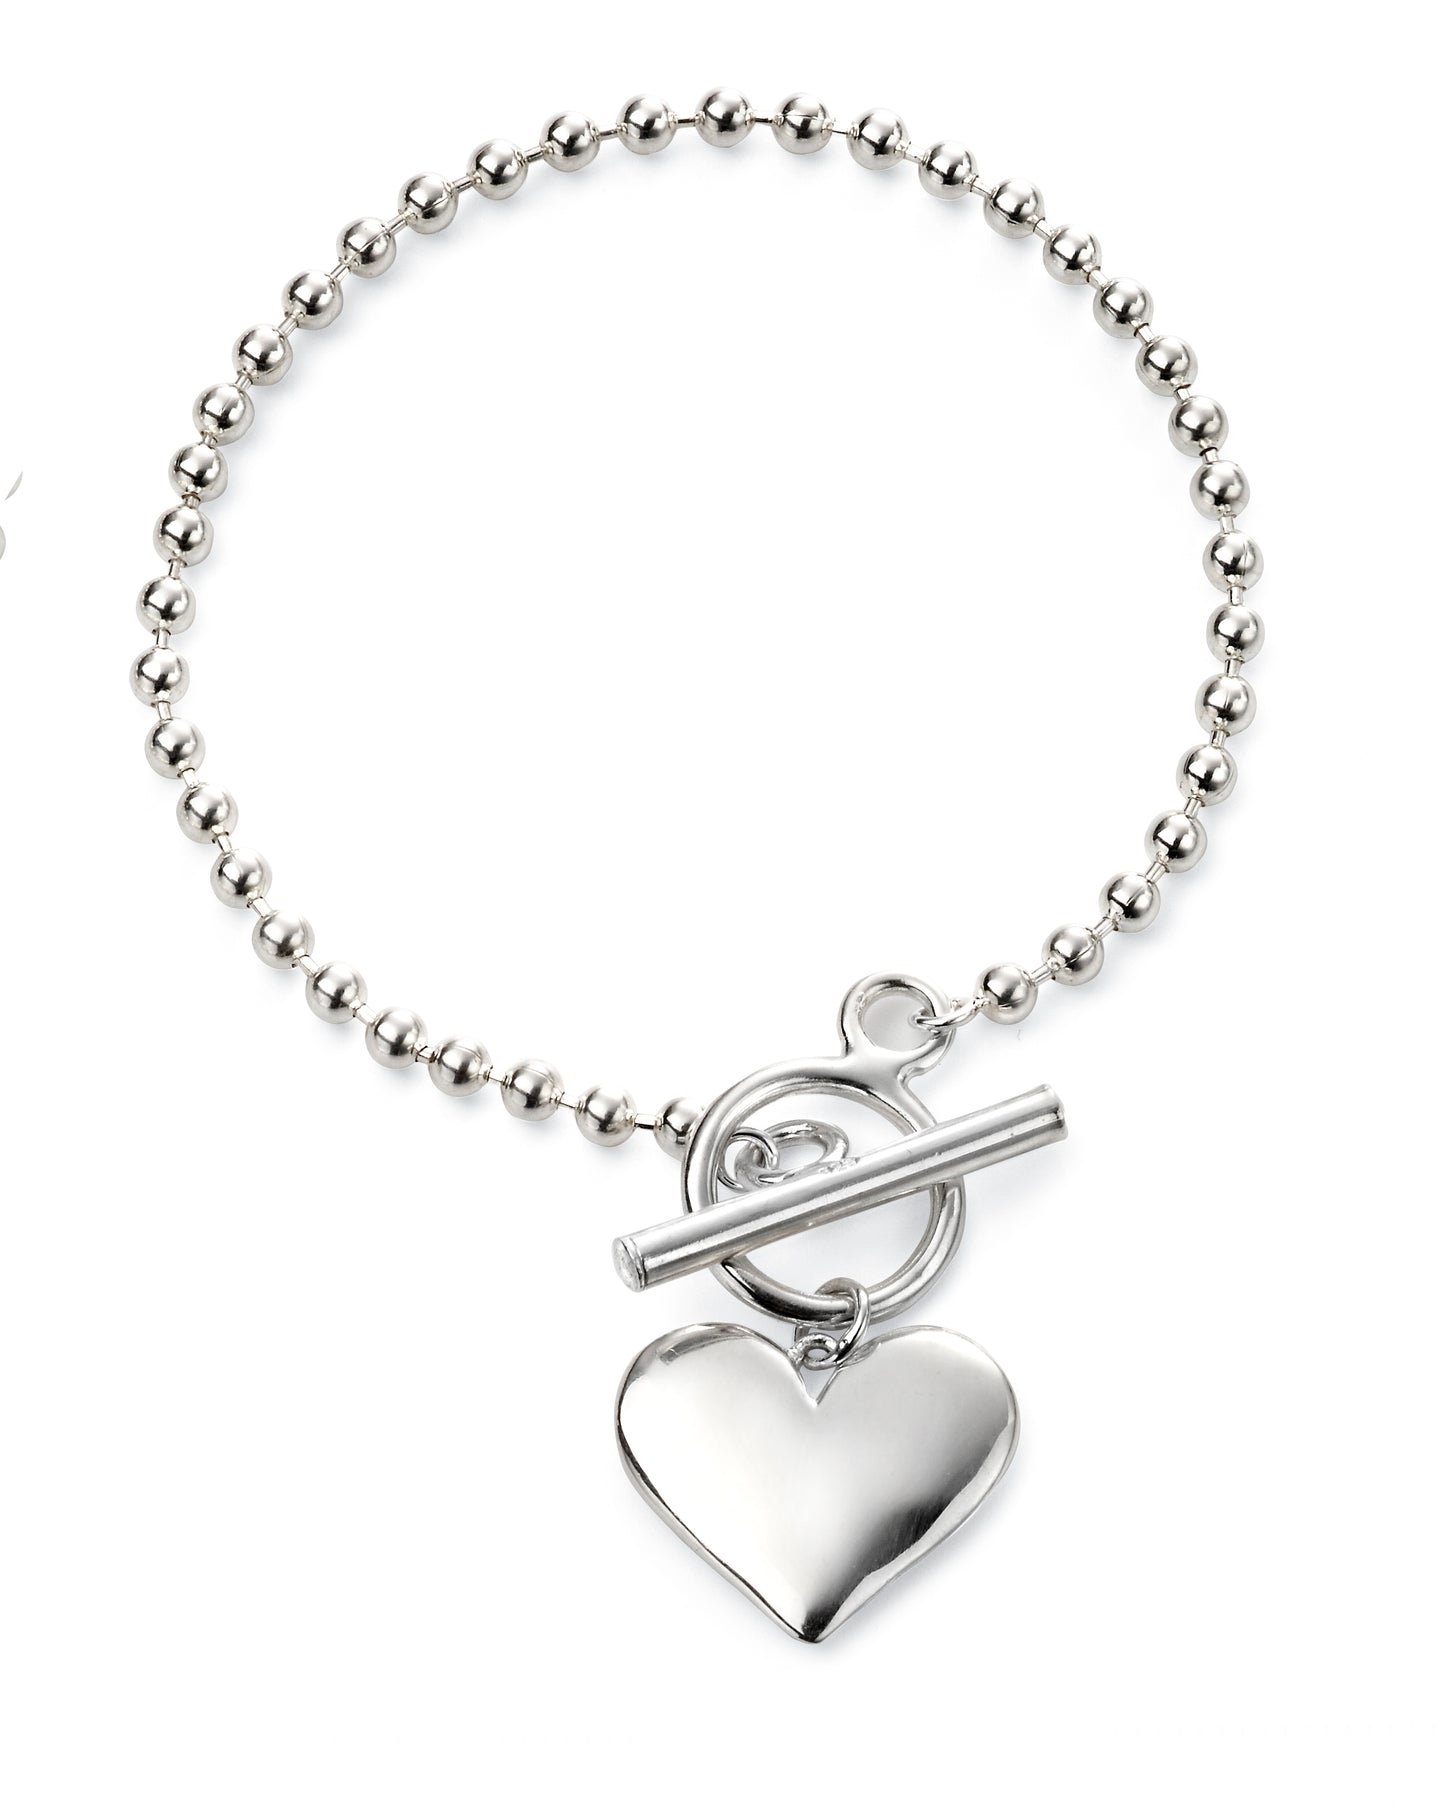 Ball Chain Bracelet With Heart Tag